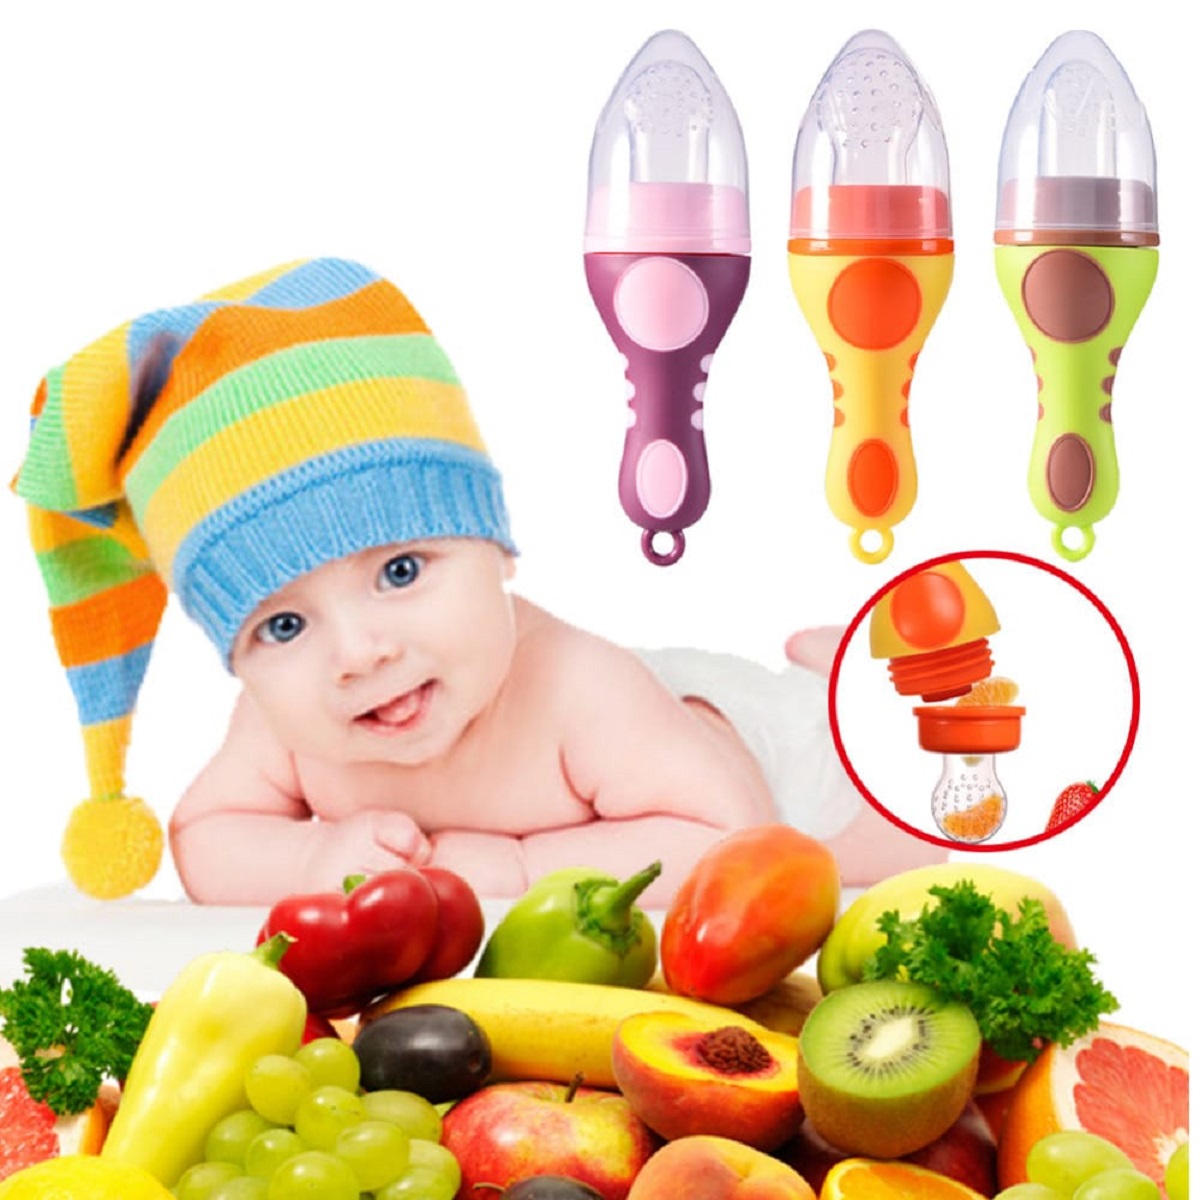 Fresh food Feeder nibbler Silicone Baby Fruit Pacifier with cover